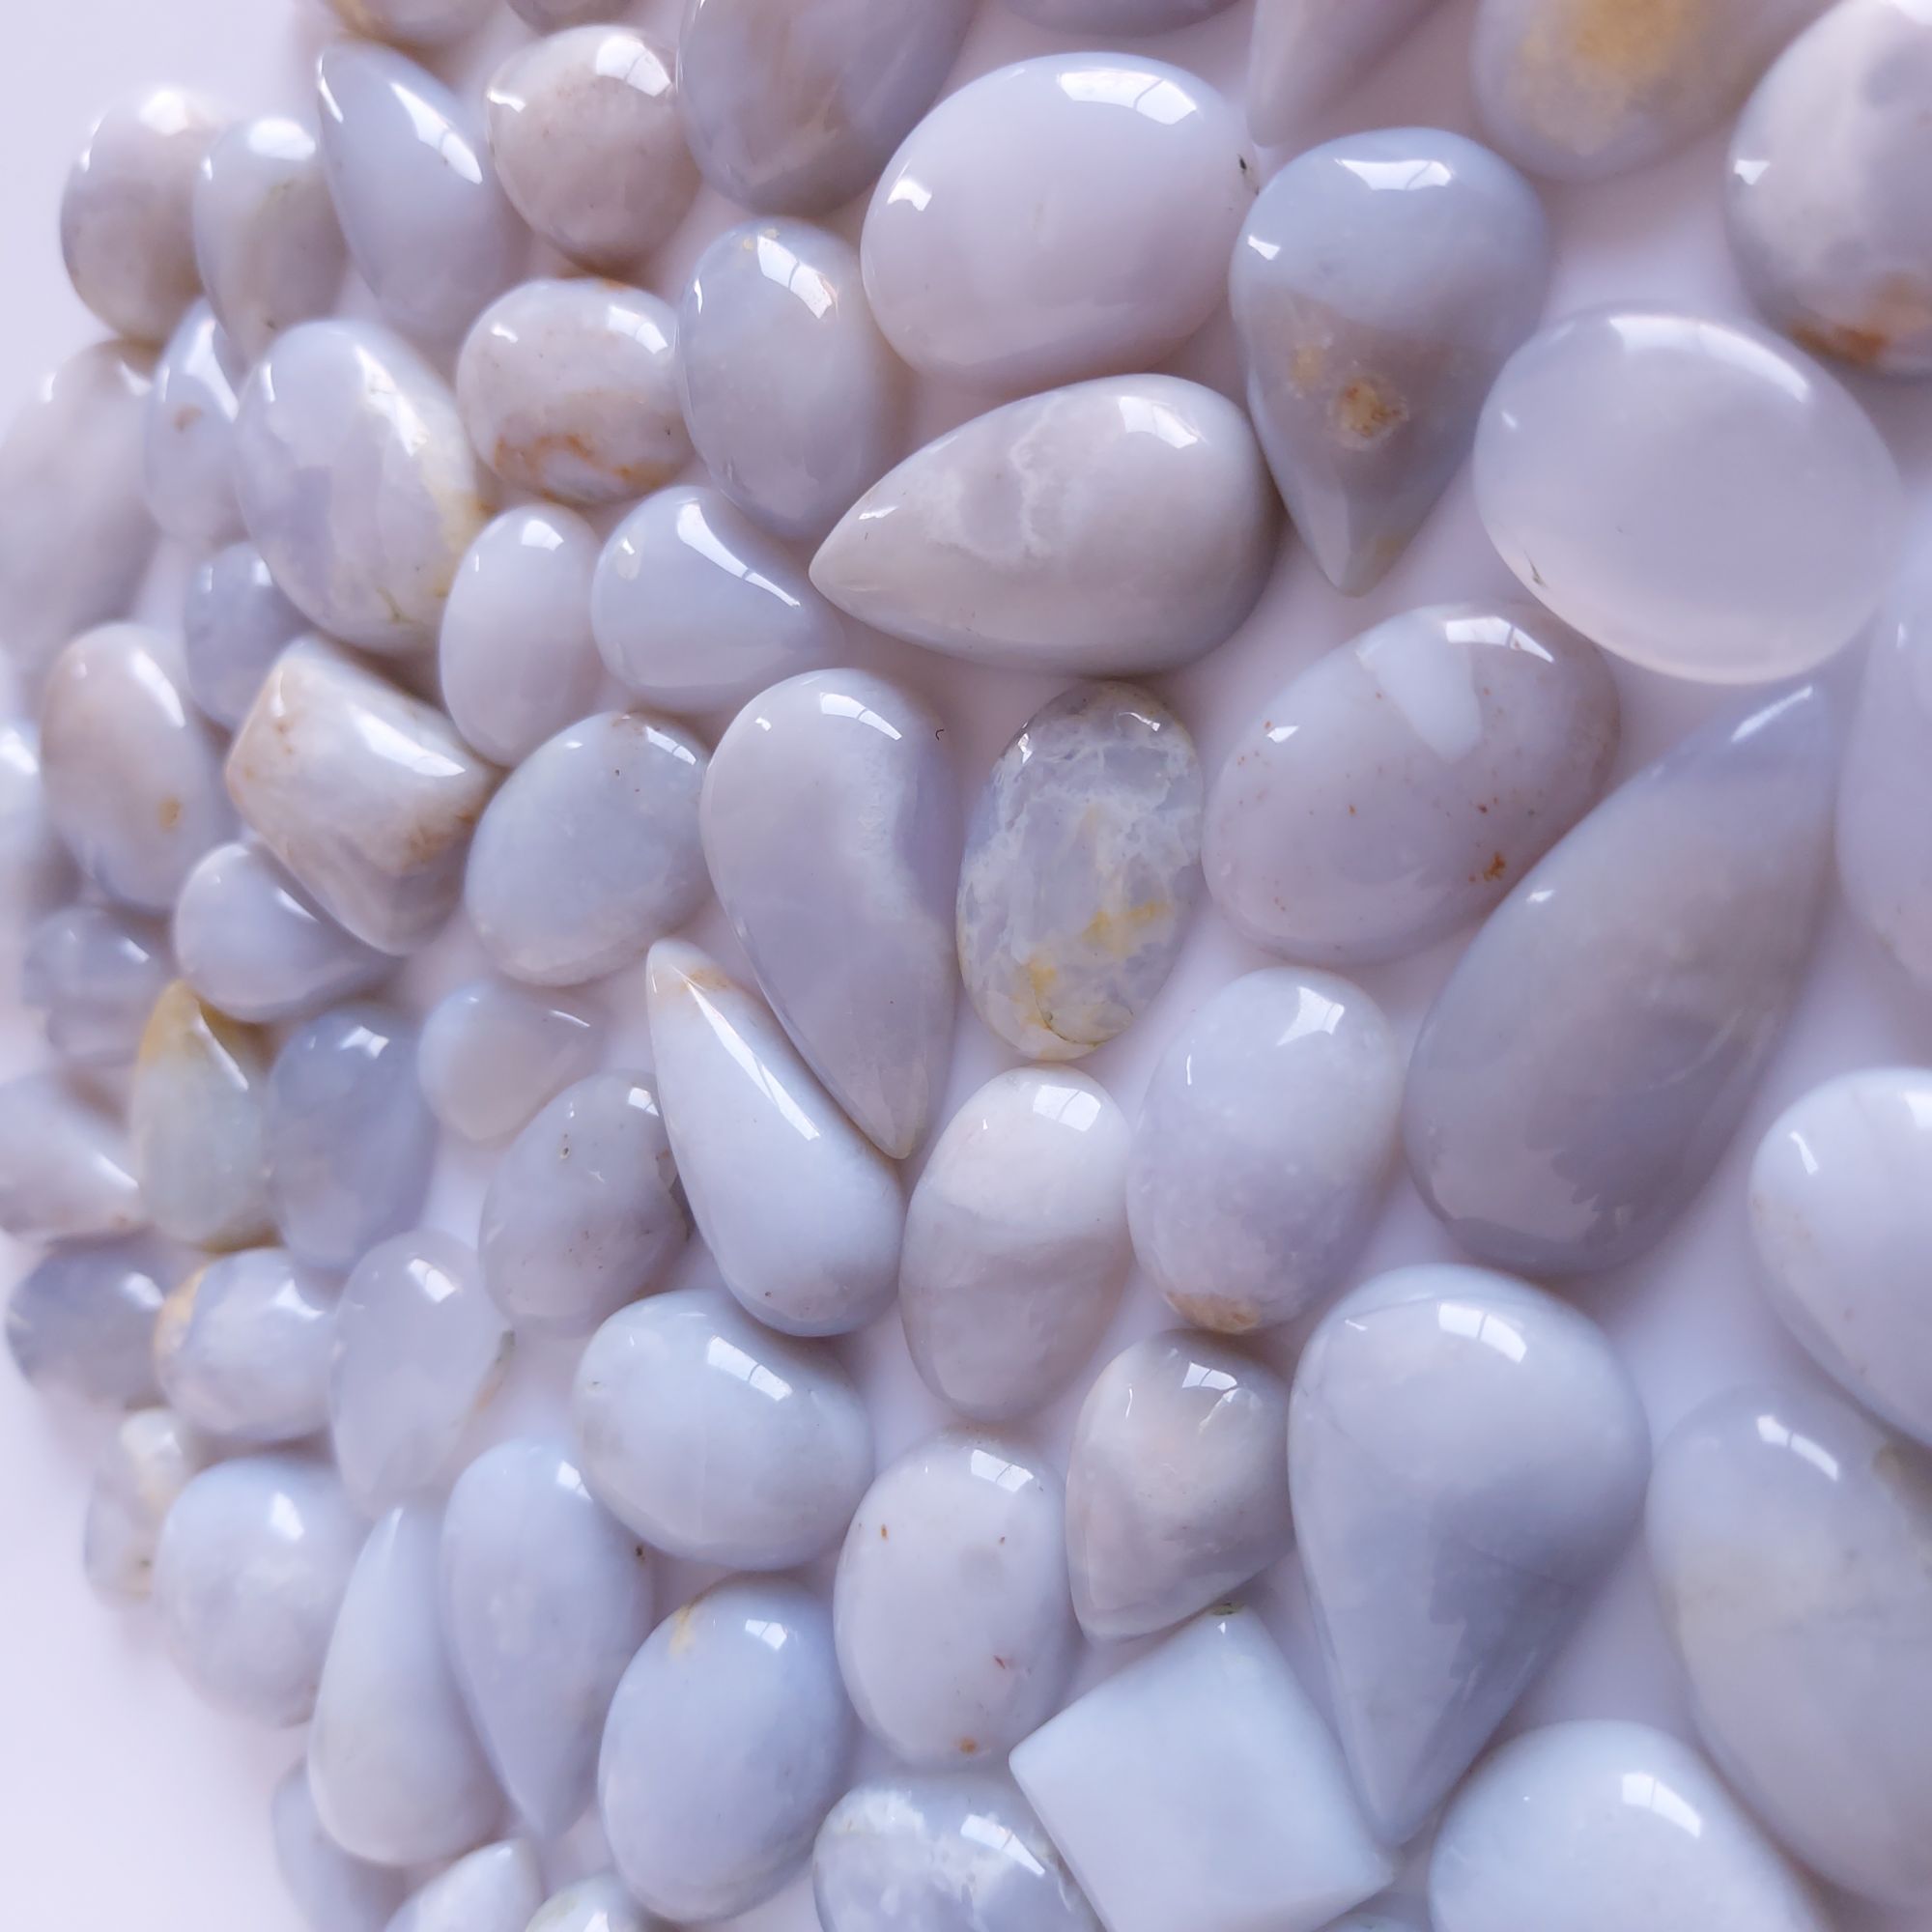 70 Pcs.1094 Cts Natural Blue Chalcedony Cabochon Loose Gemstone For Jewelry Wholesale Lot Size 29x20 18x12 mm